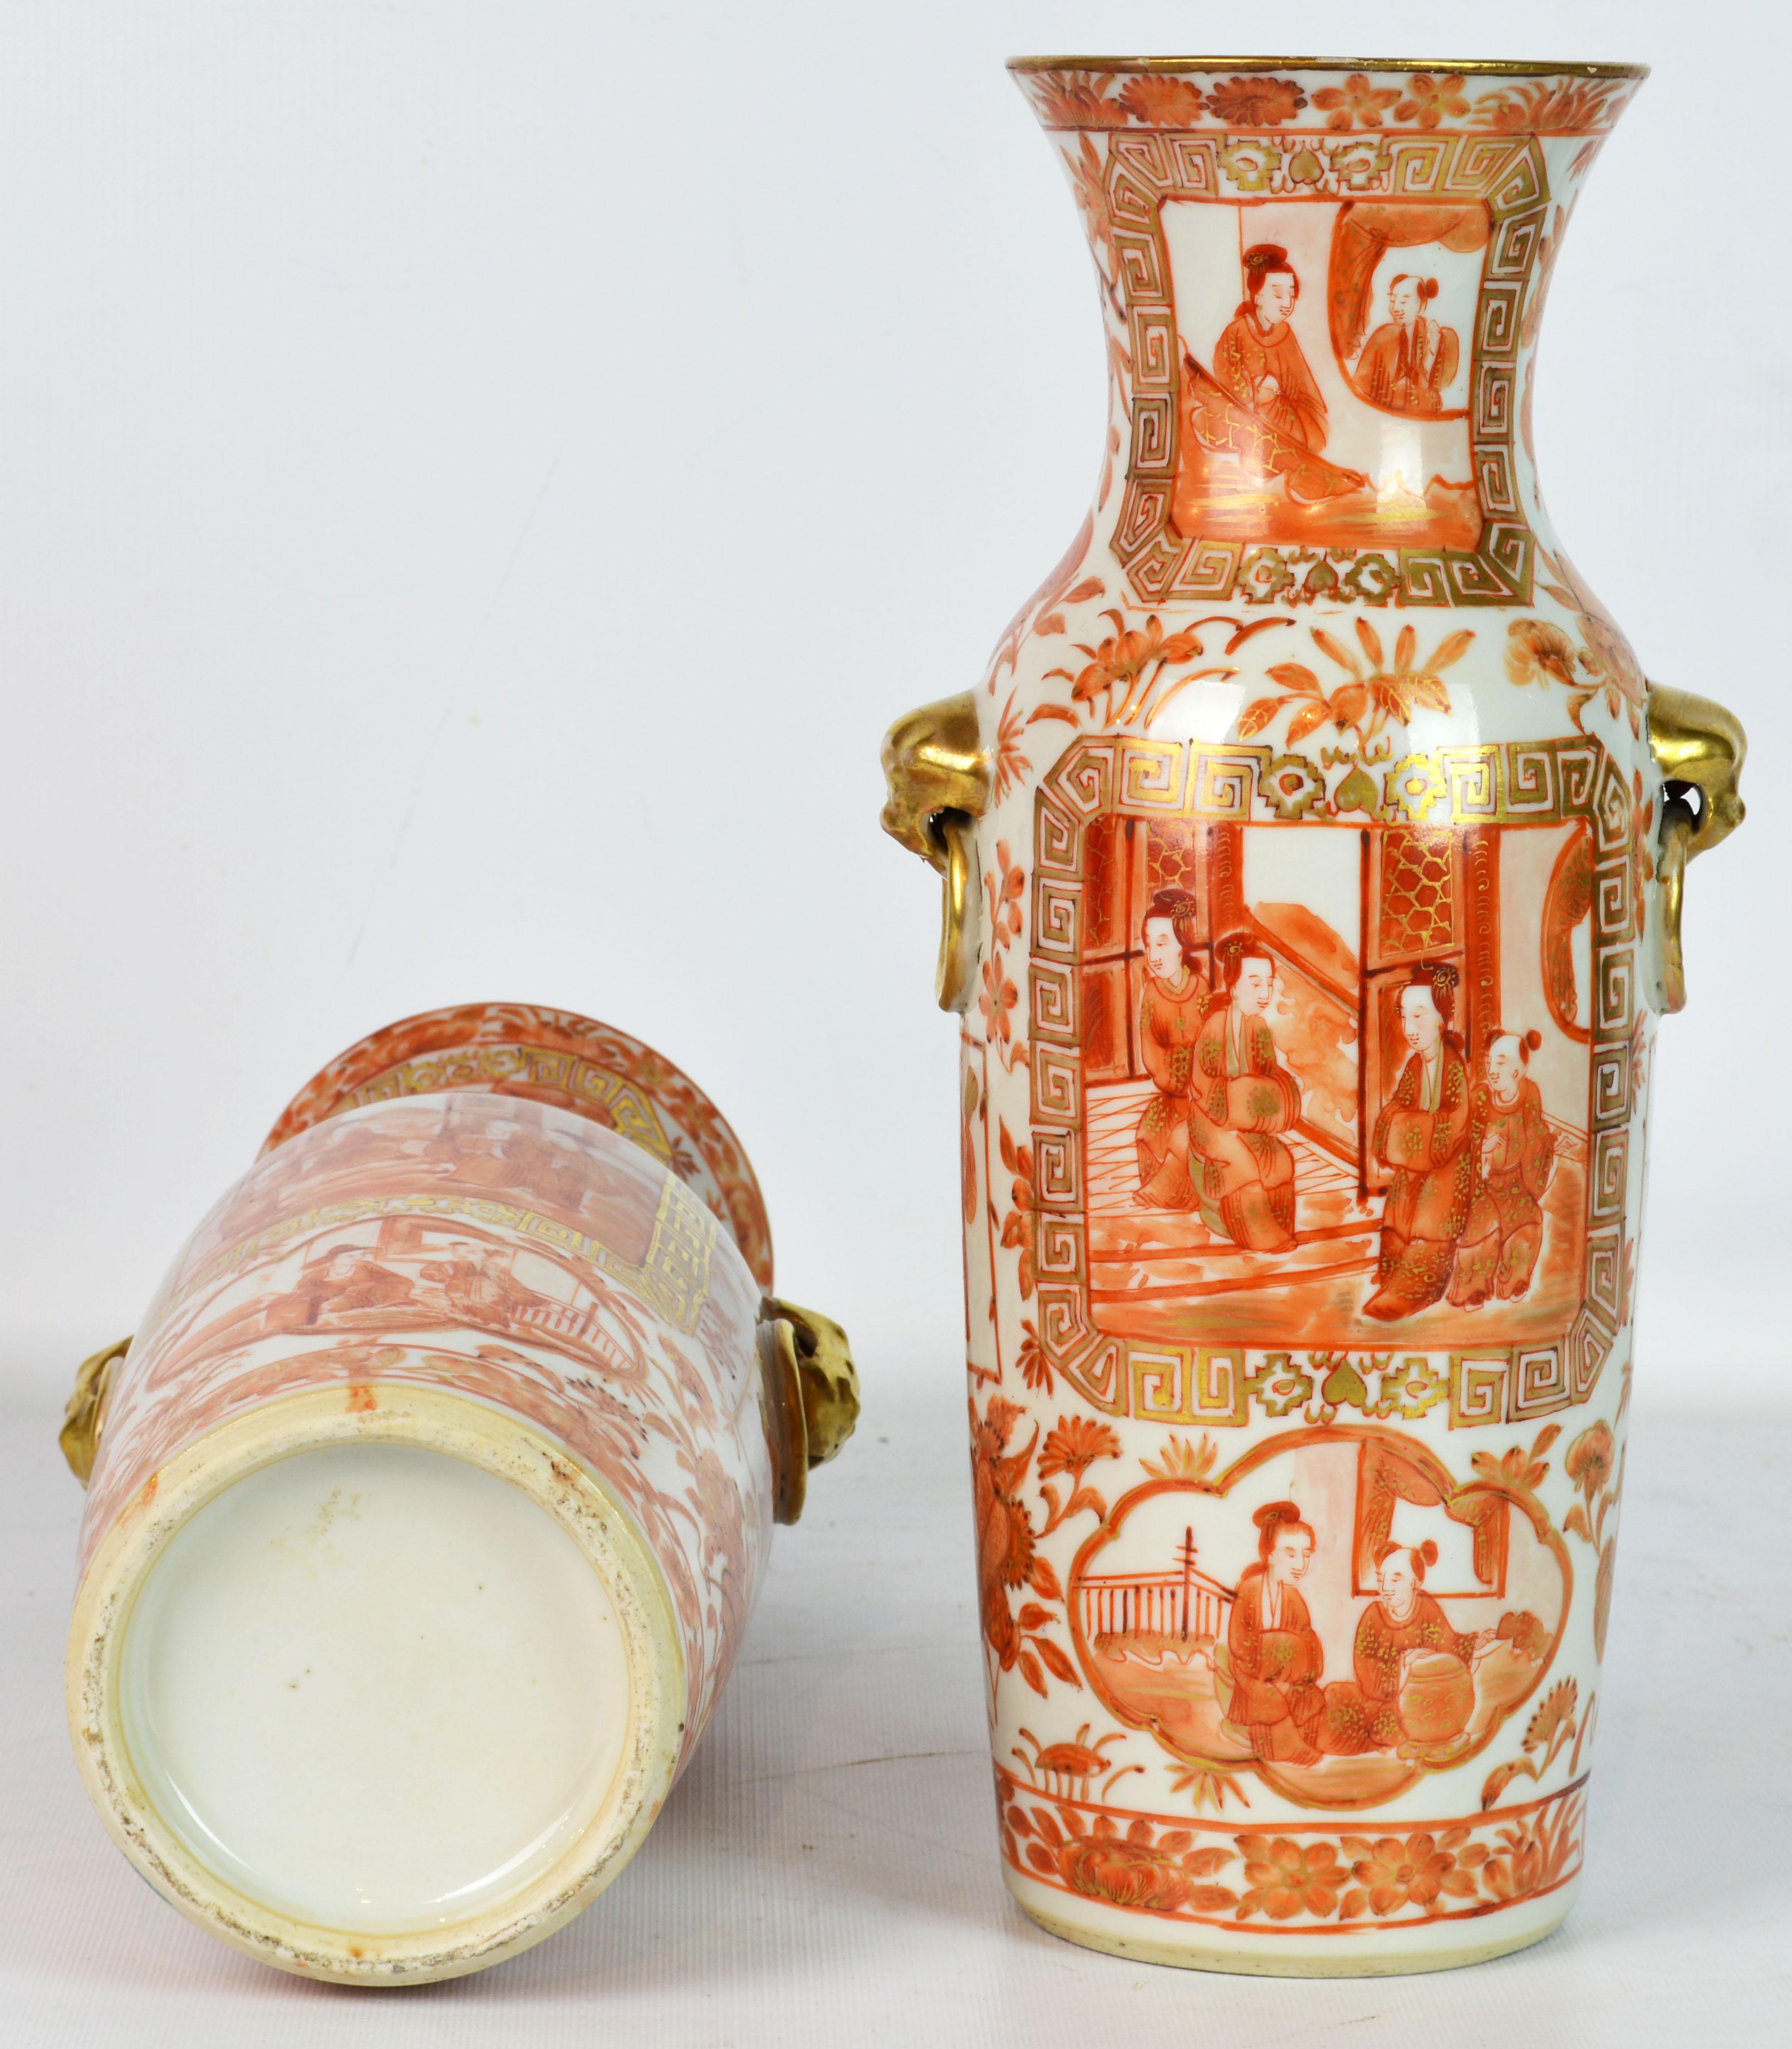 Porcelain Rare 19th Century Orange and Gilt Decorated Chinese Export Daoguang Vases, Pair